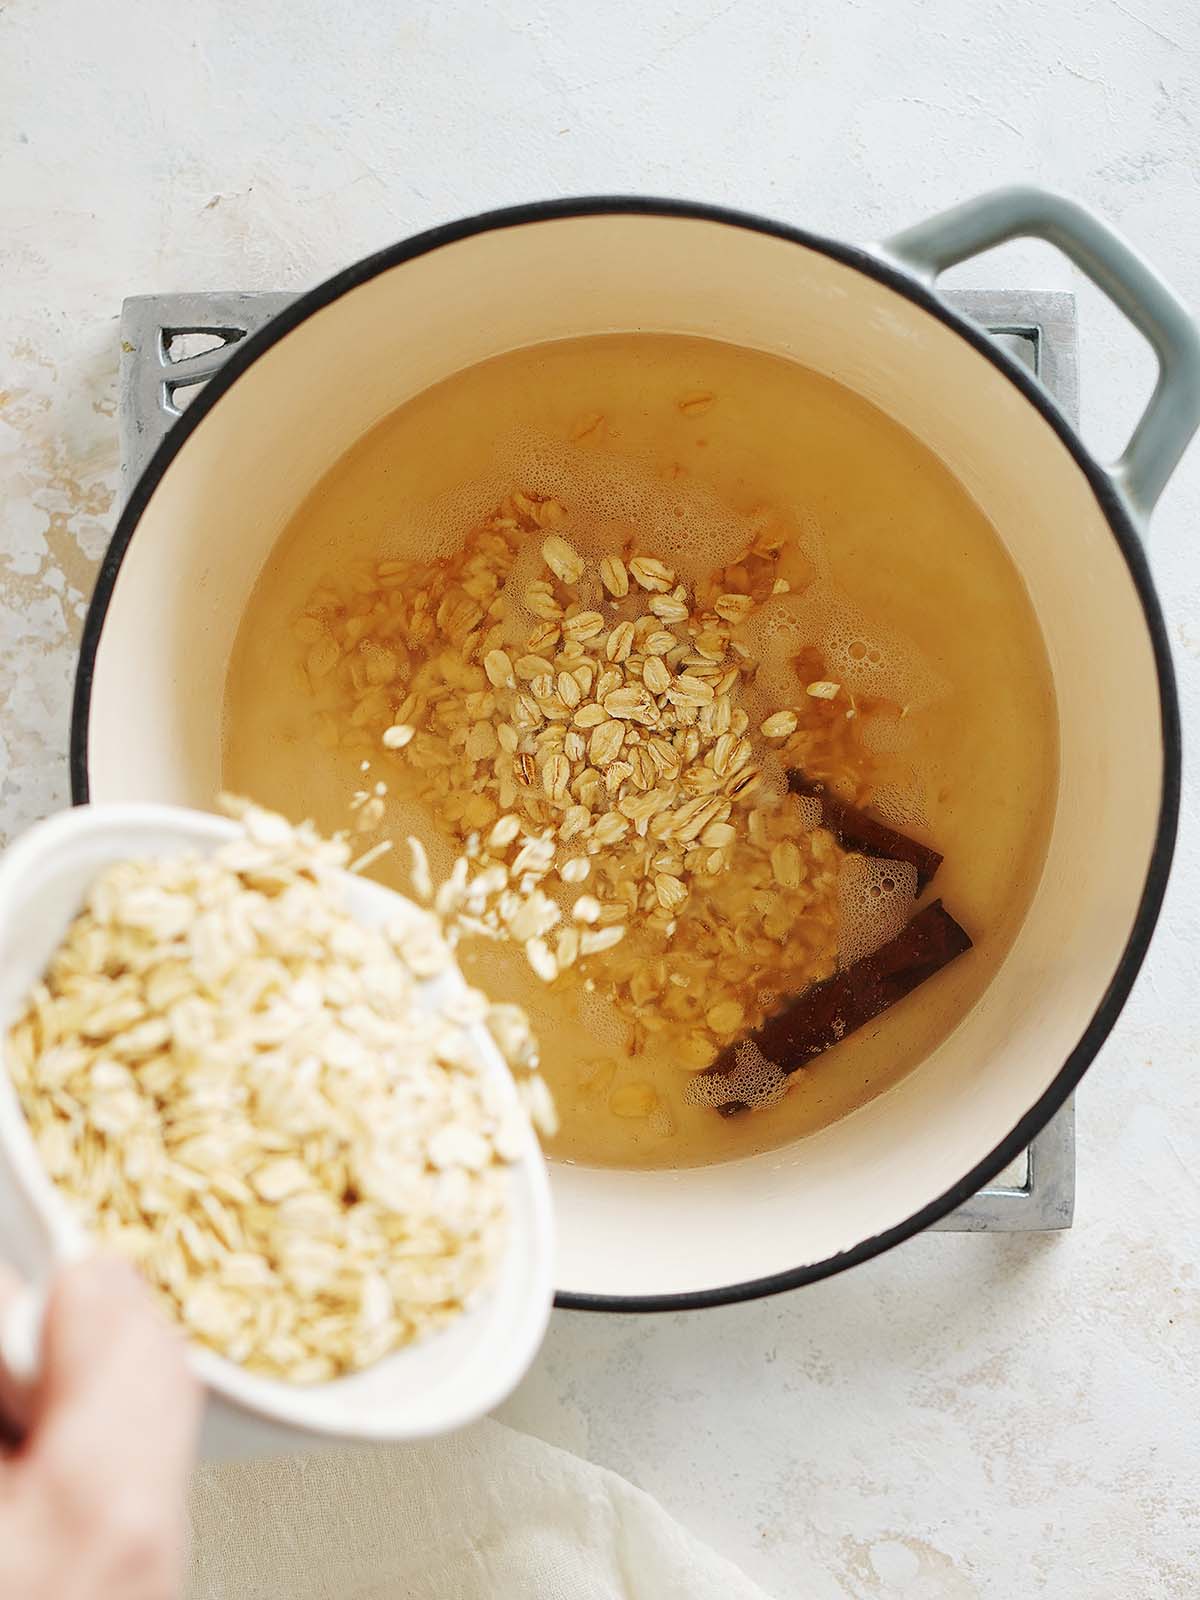 A medium pot with water, cinnamon sticks and pouring oatmeal flakes in it.